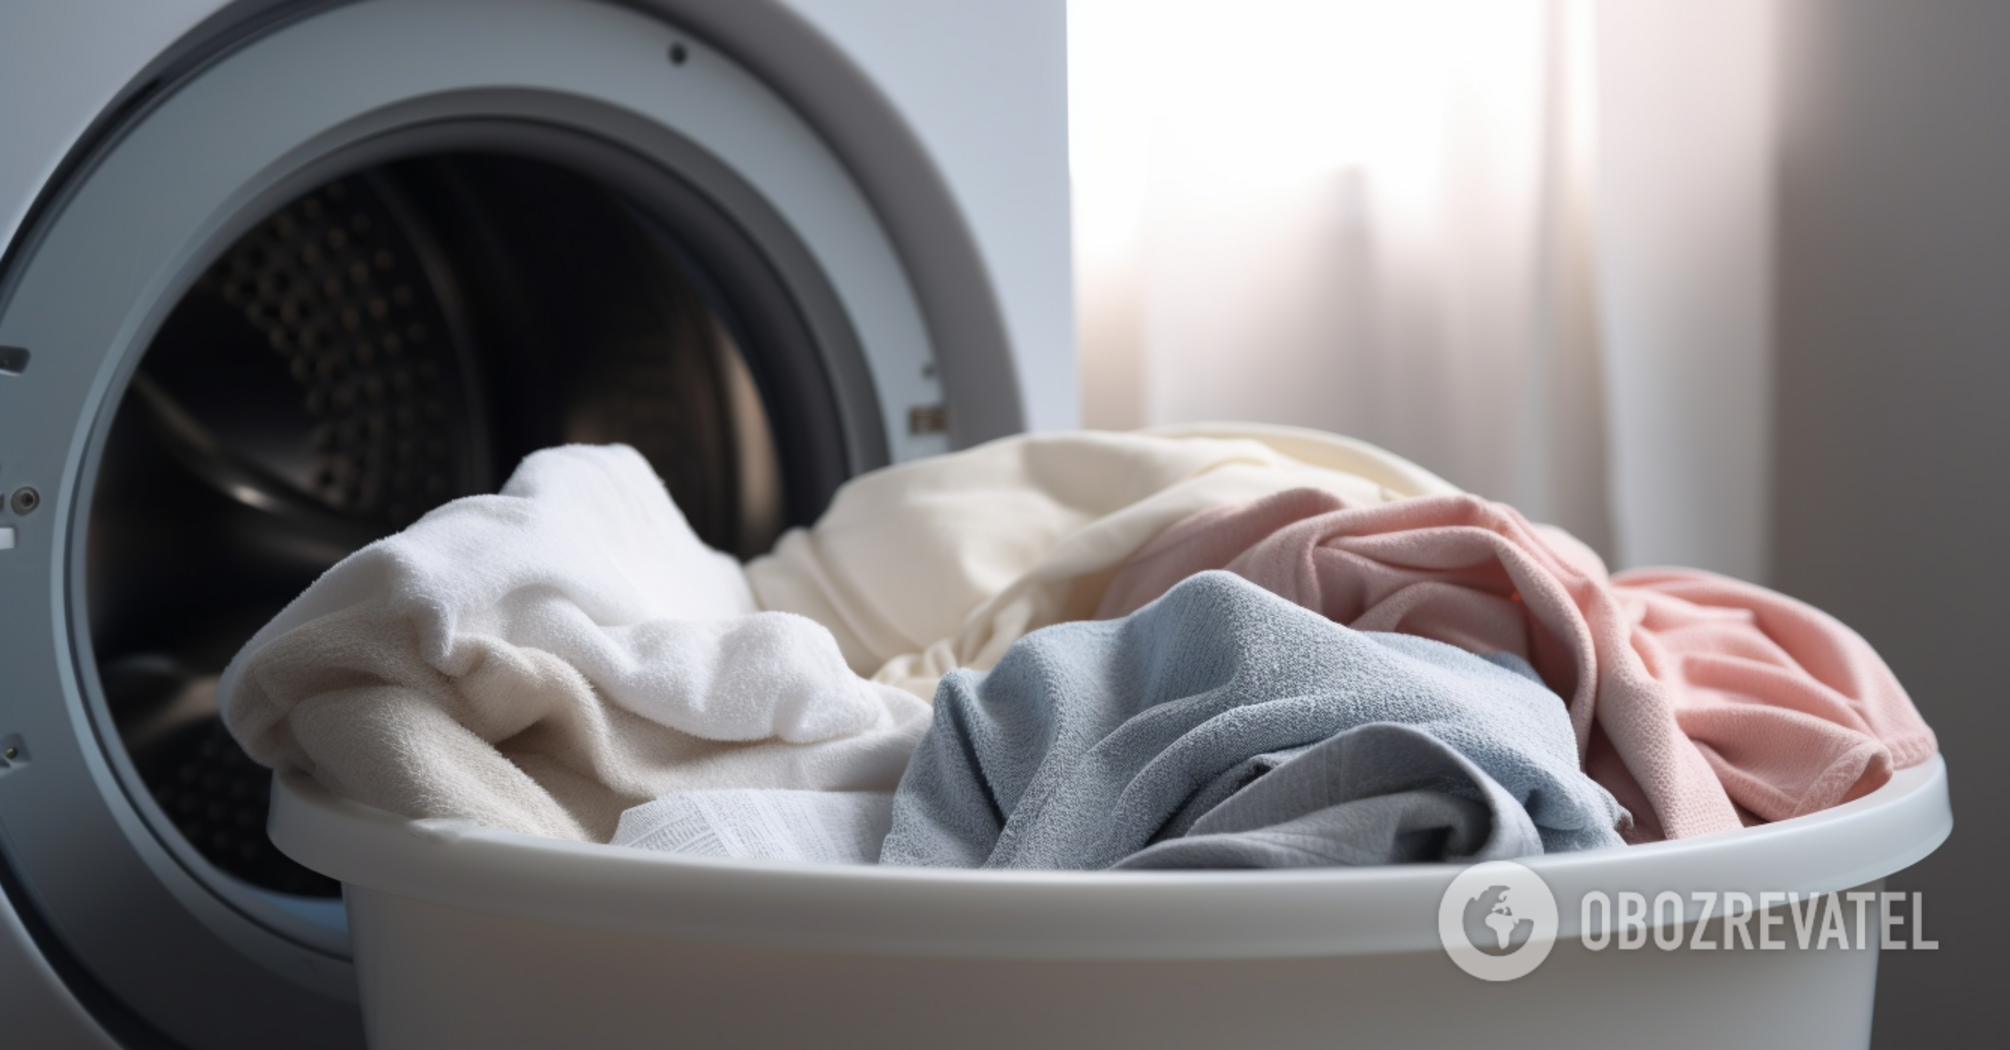 You're Doing Your Laundry Wrong: 7 Tips to Clean Clothes More Expertly - WSJ